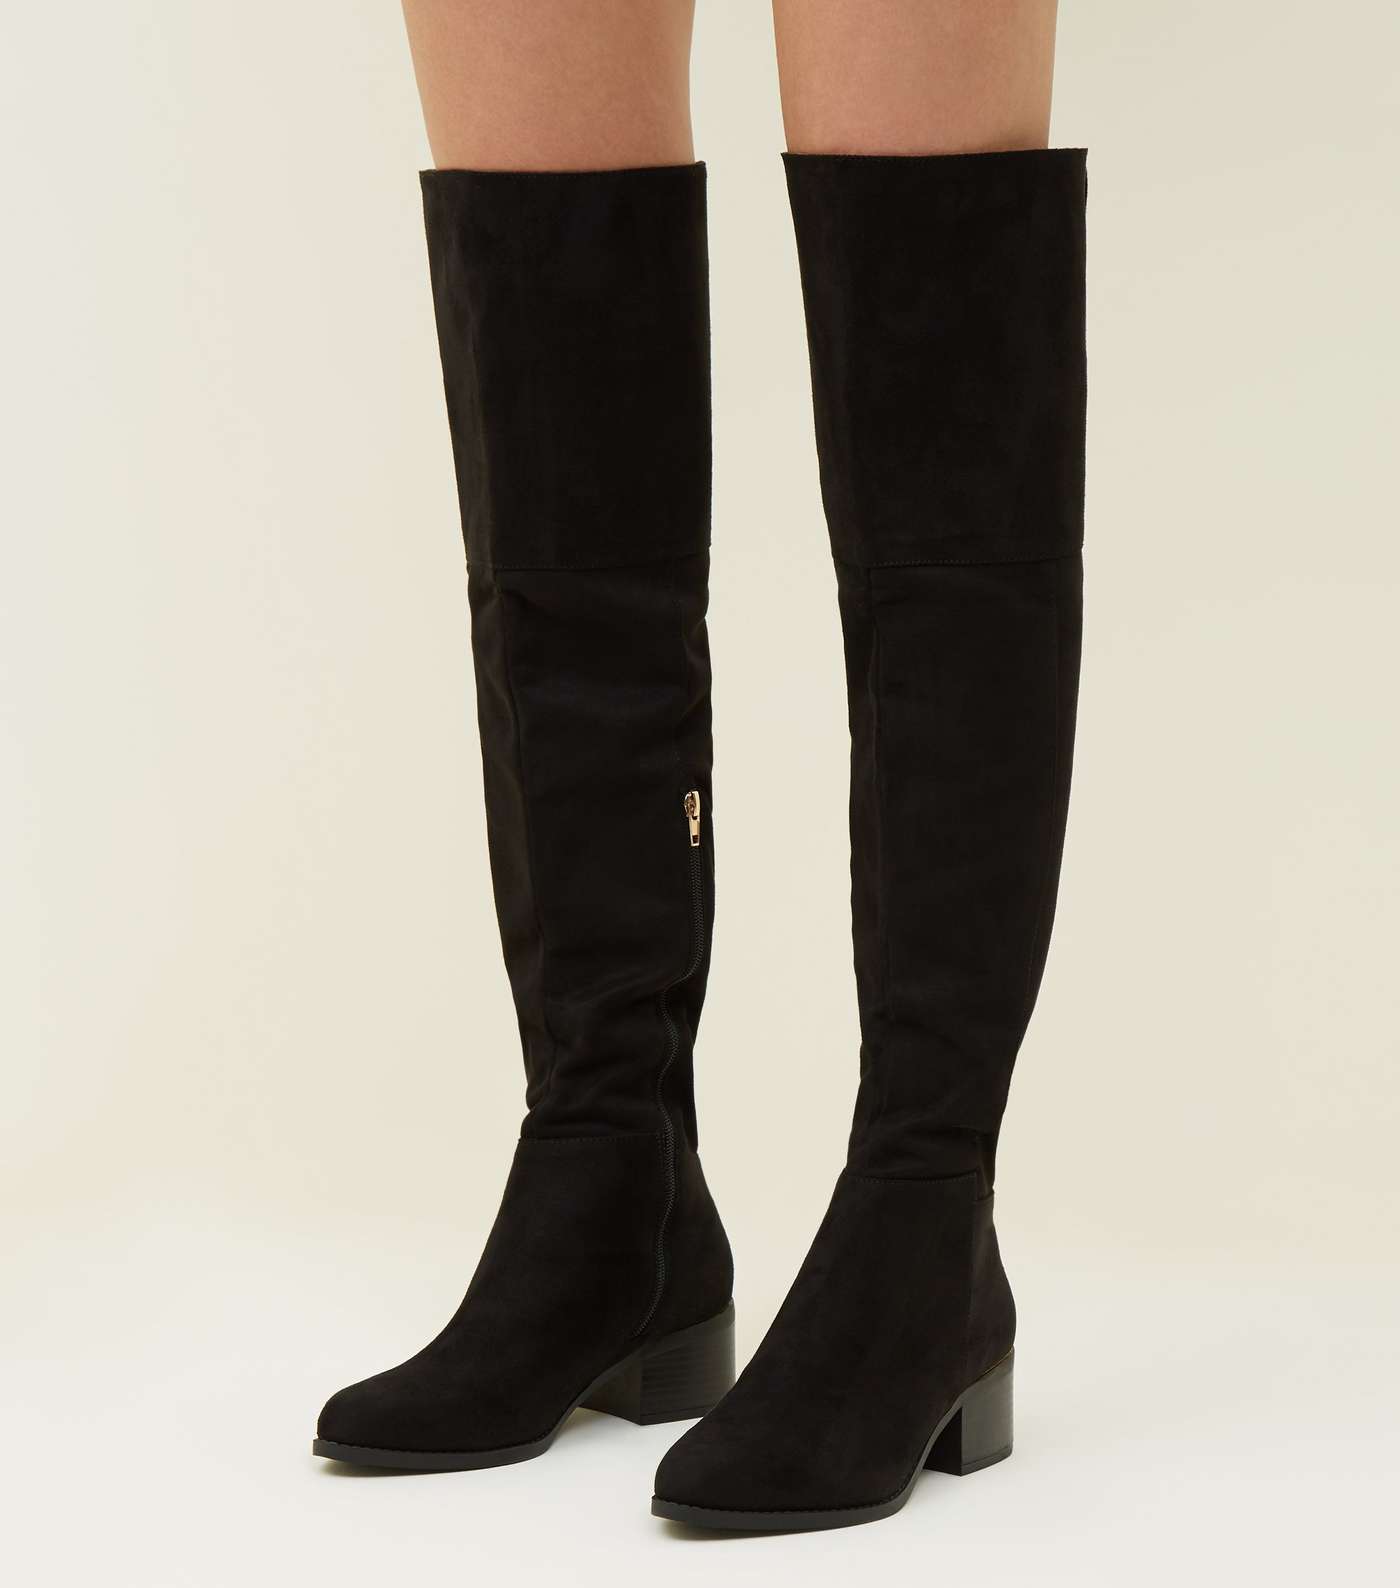 Black Suedette Over The Knee Heeled Boots Image 2